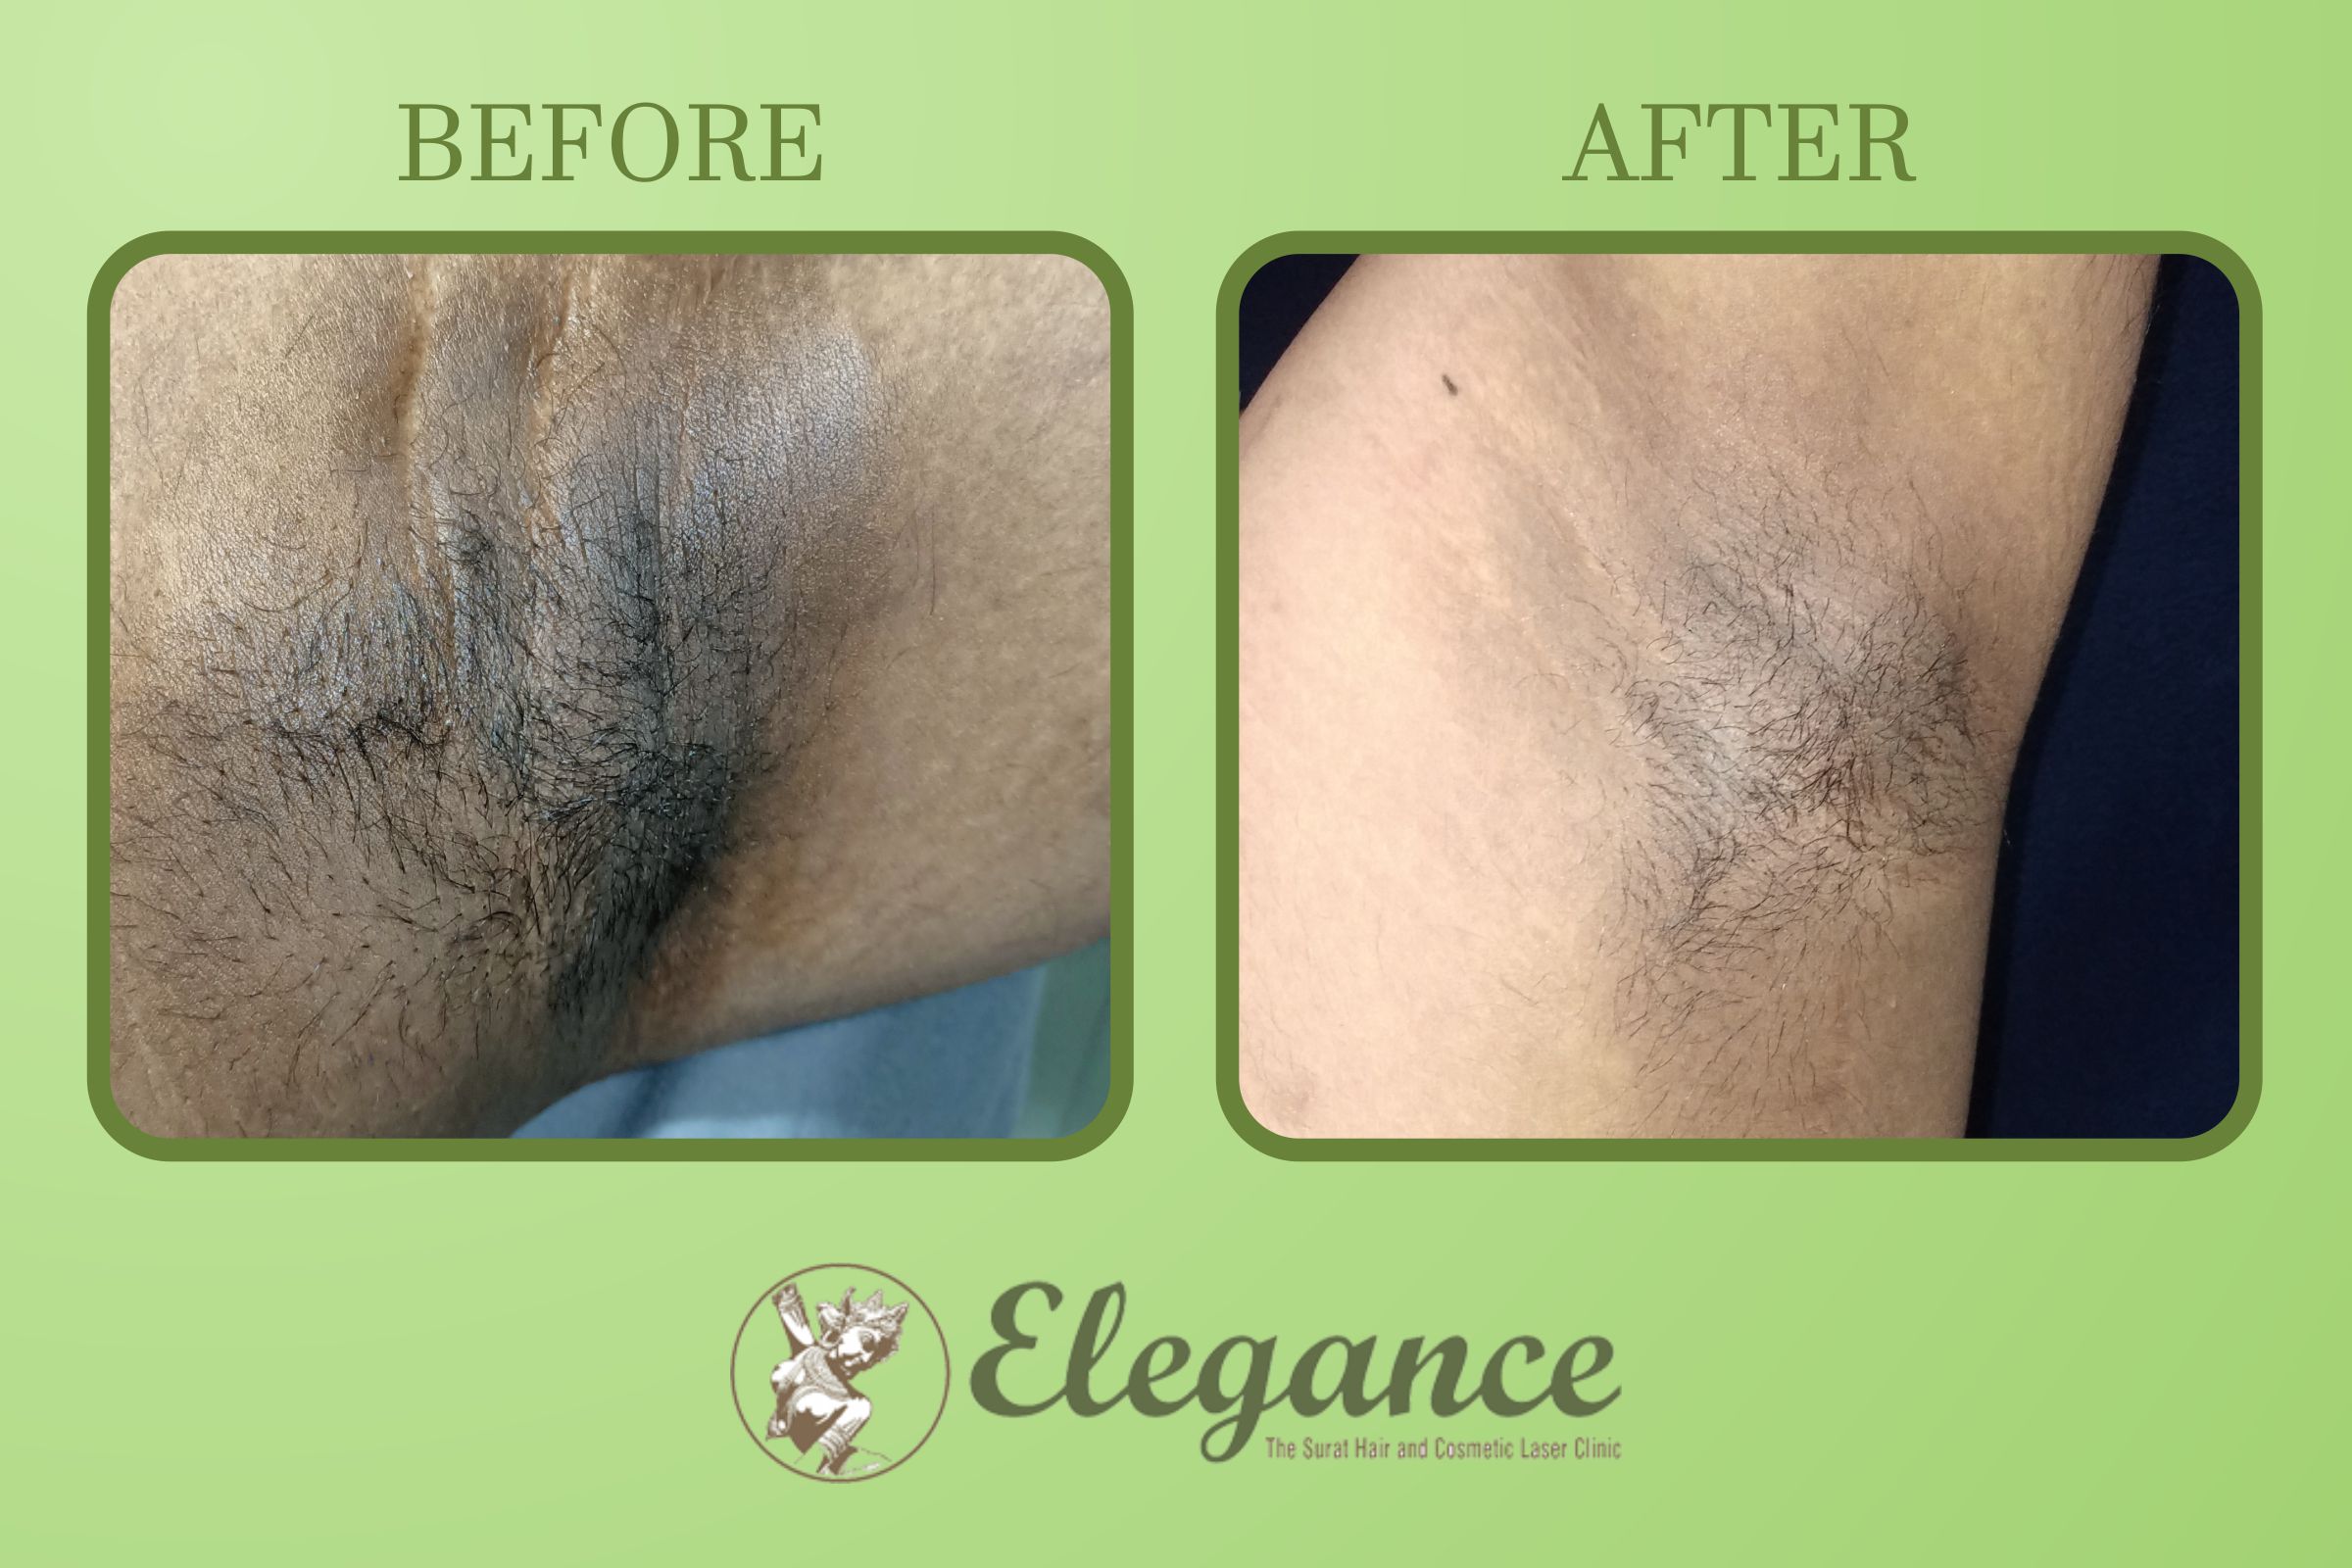 Axillary Chemical Peel Before After In Surat, Gujarat, India